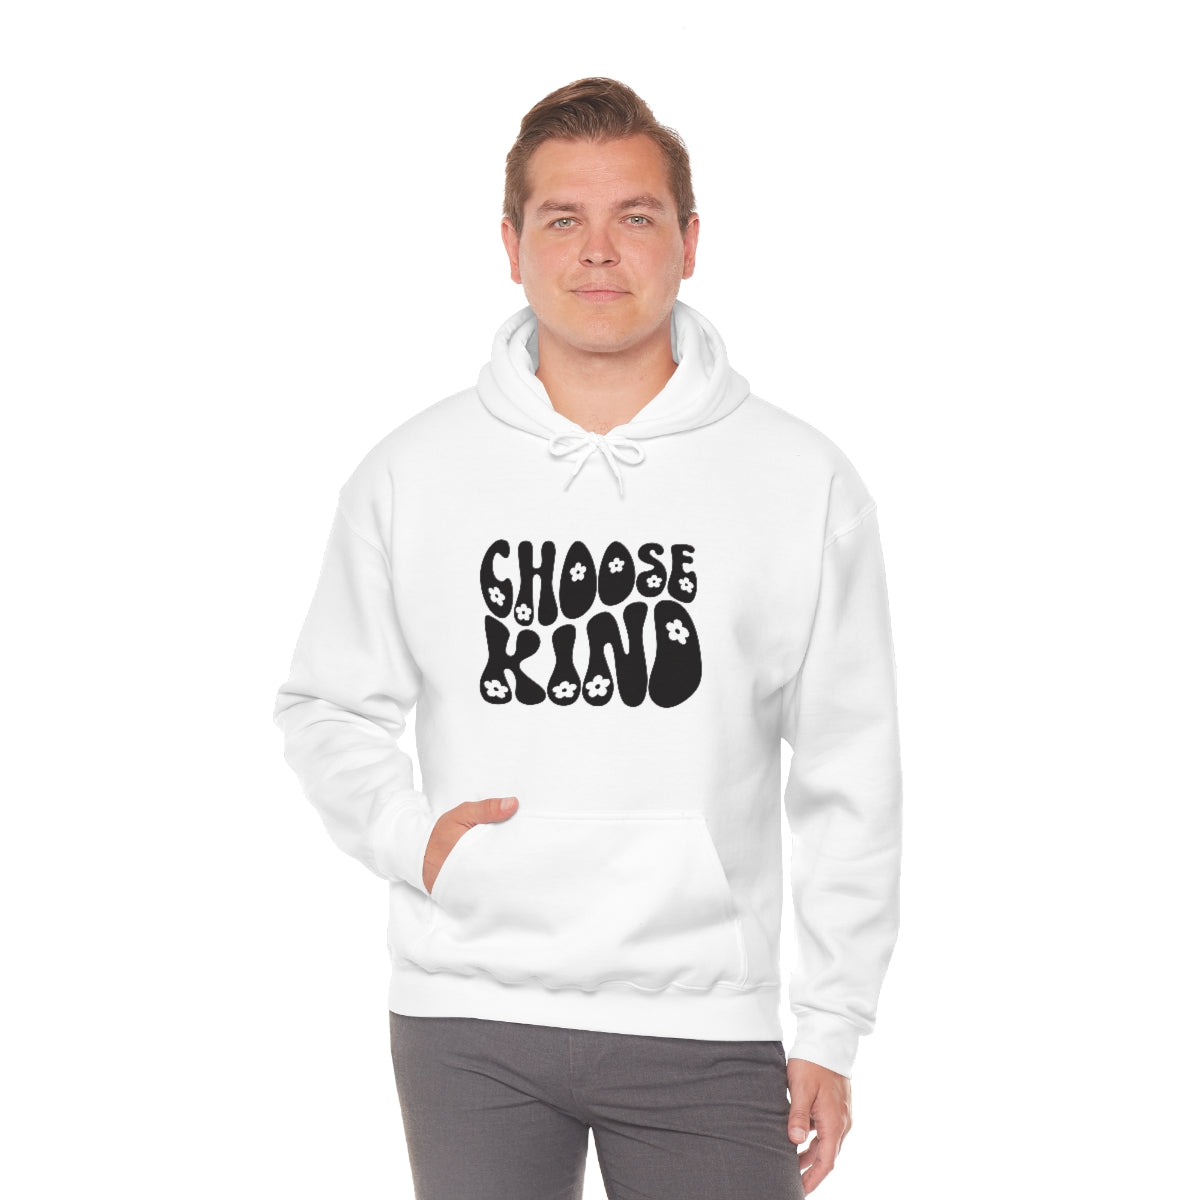 Choose Kindness Every Day with Our "Choose Kind" Sweatshirt